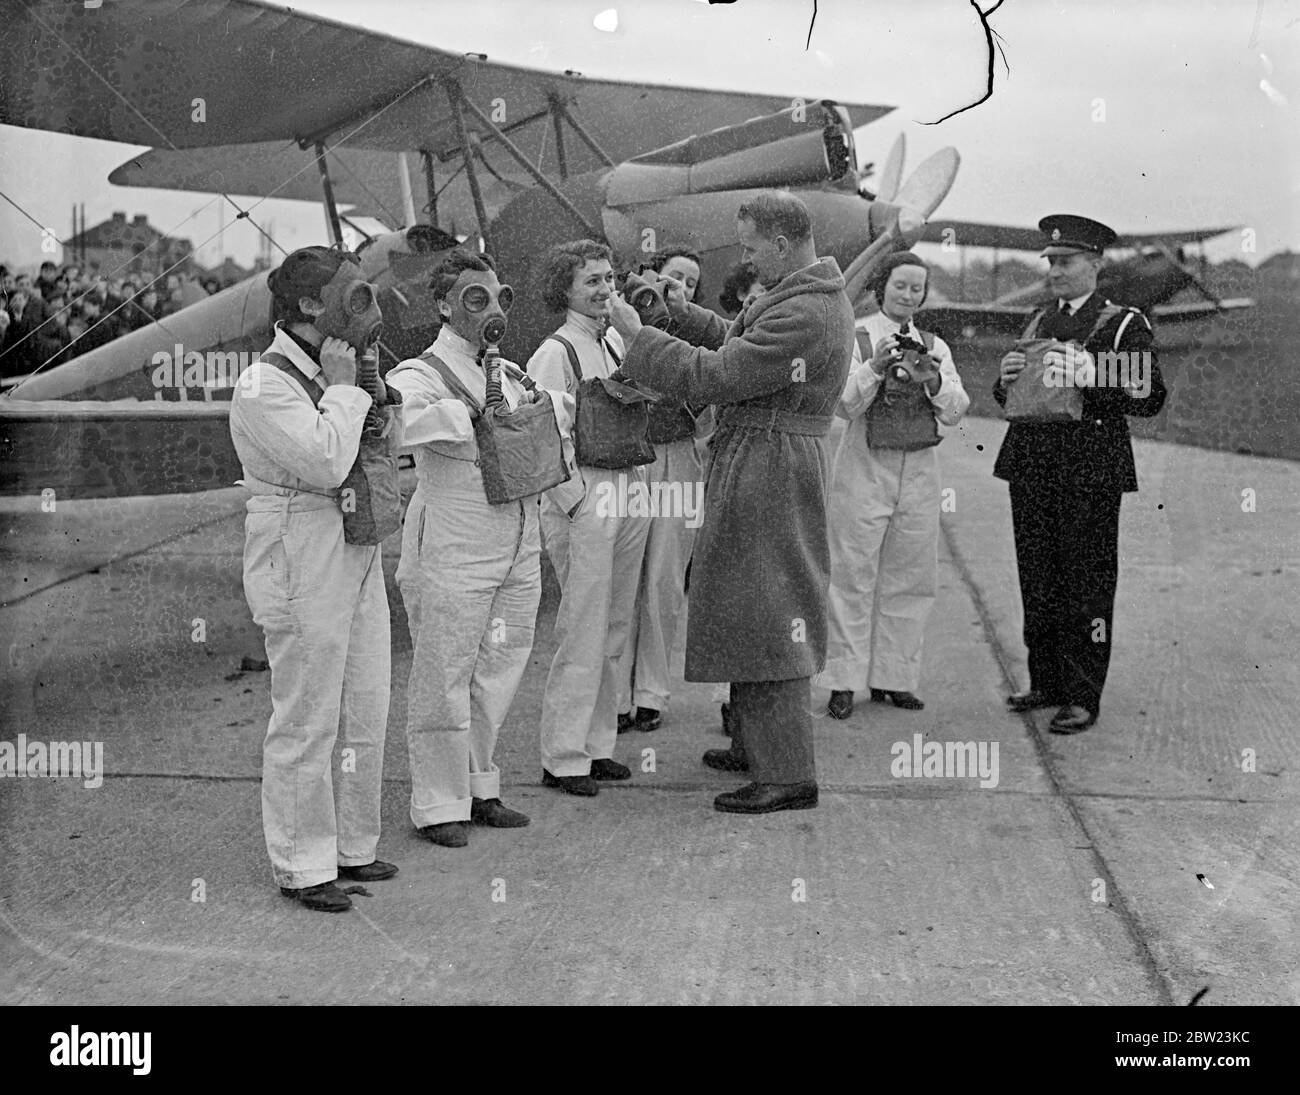 Mayor of Romford sees air girls, anti air raid training. The Mayor of Romford, councillor C H Allen, J P, visited Marylands Aerodrome, near Romford, Essex, today (Sunday) to see the training of members of the women's Aero club, who are receiving instruction in air raid precautions. Photo shows, the Mayor of Romford, councillor CH Allen, JP, adjusting gas masks for women members of the groundstaff at marylands Aerodrome, Romford, Essex. 20 February 1938 Stock Photo